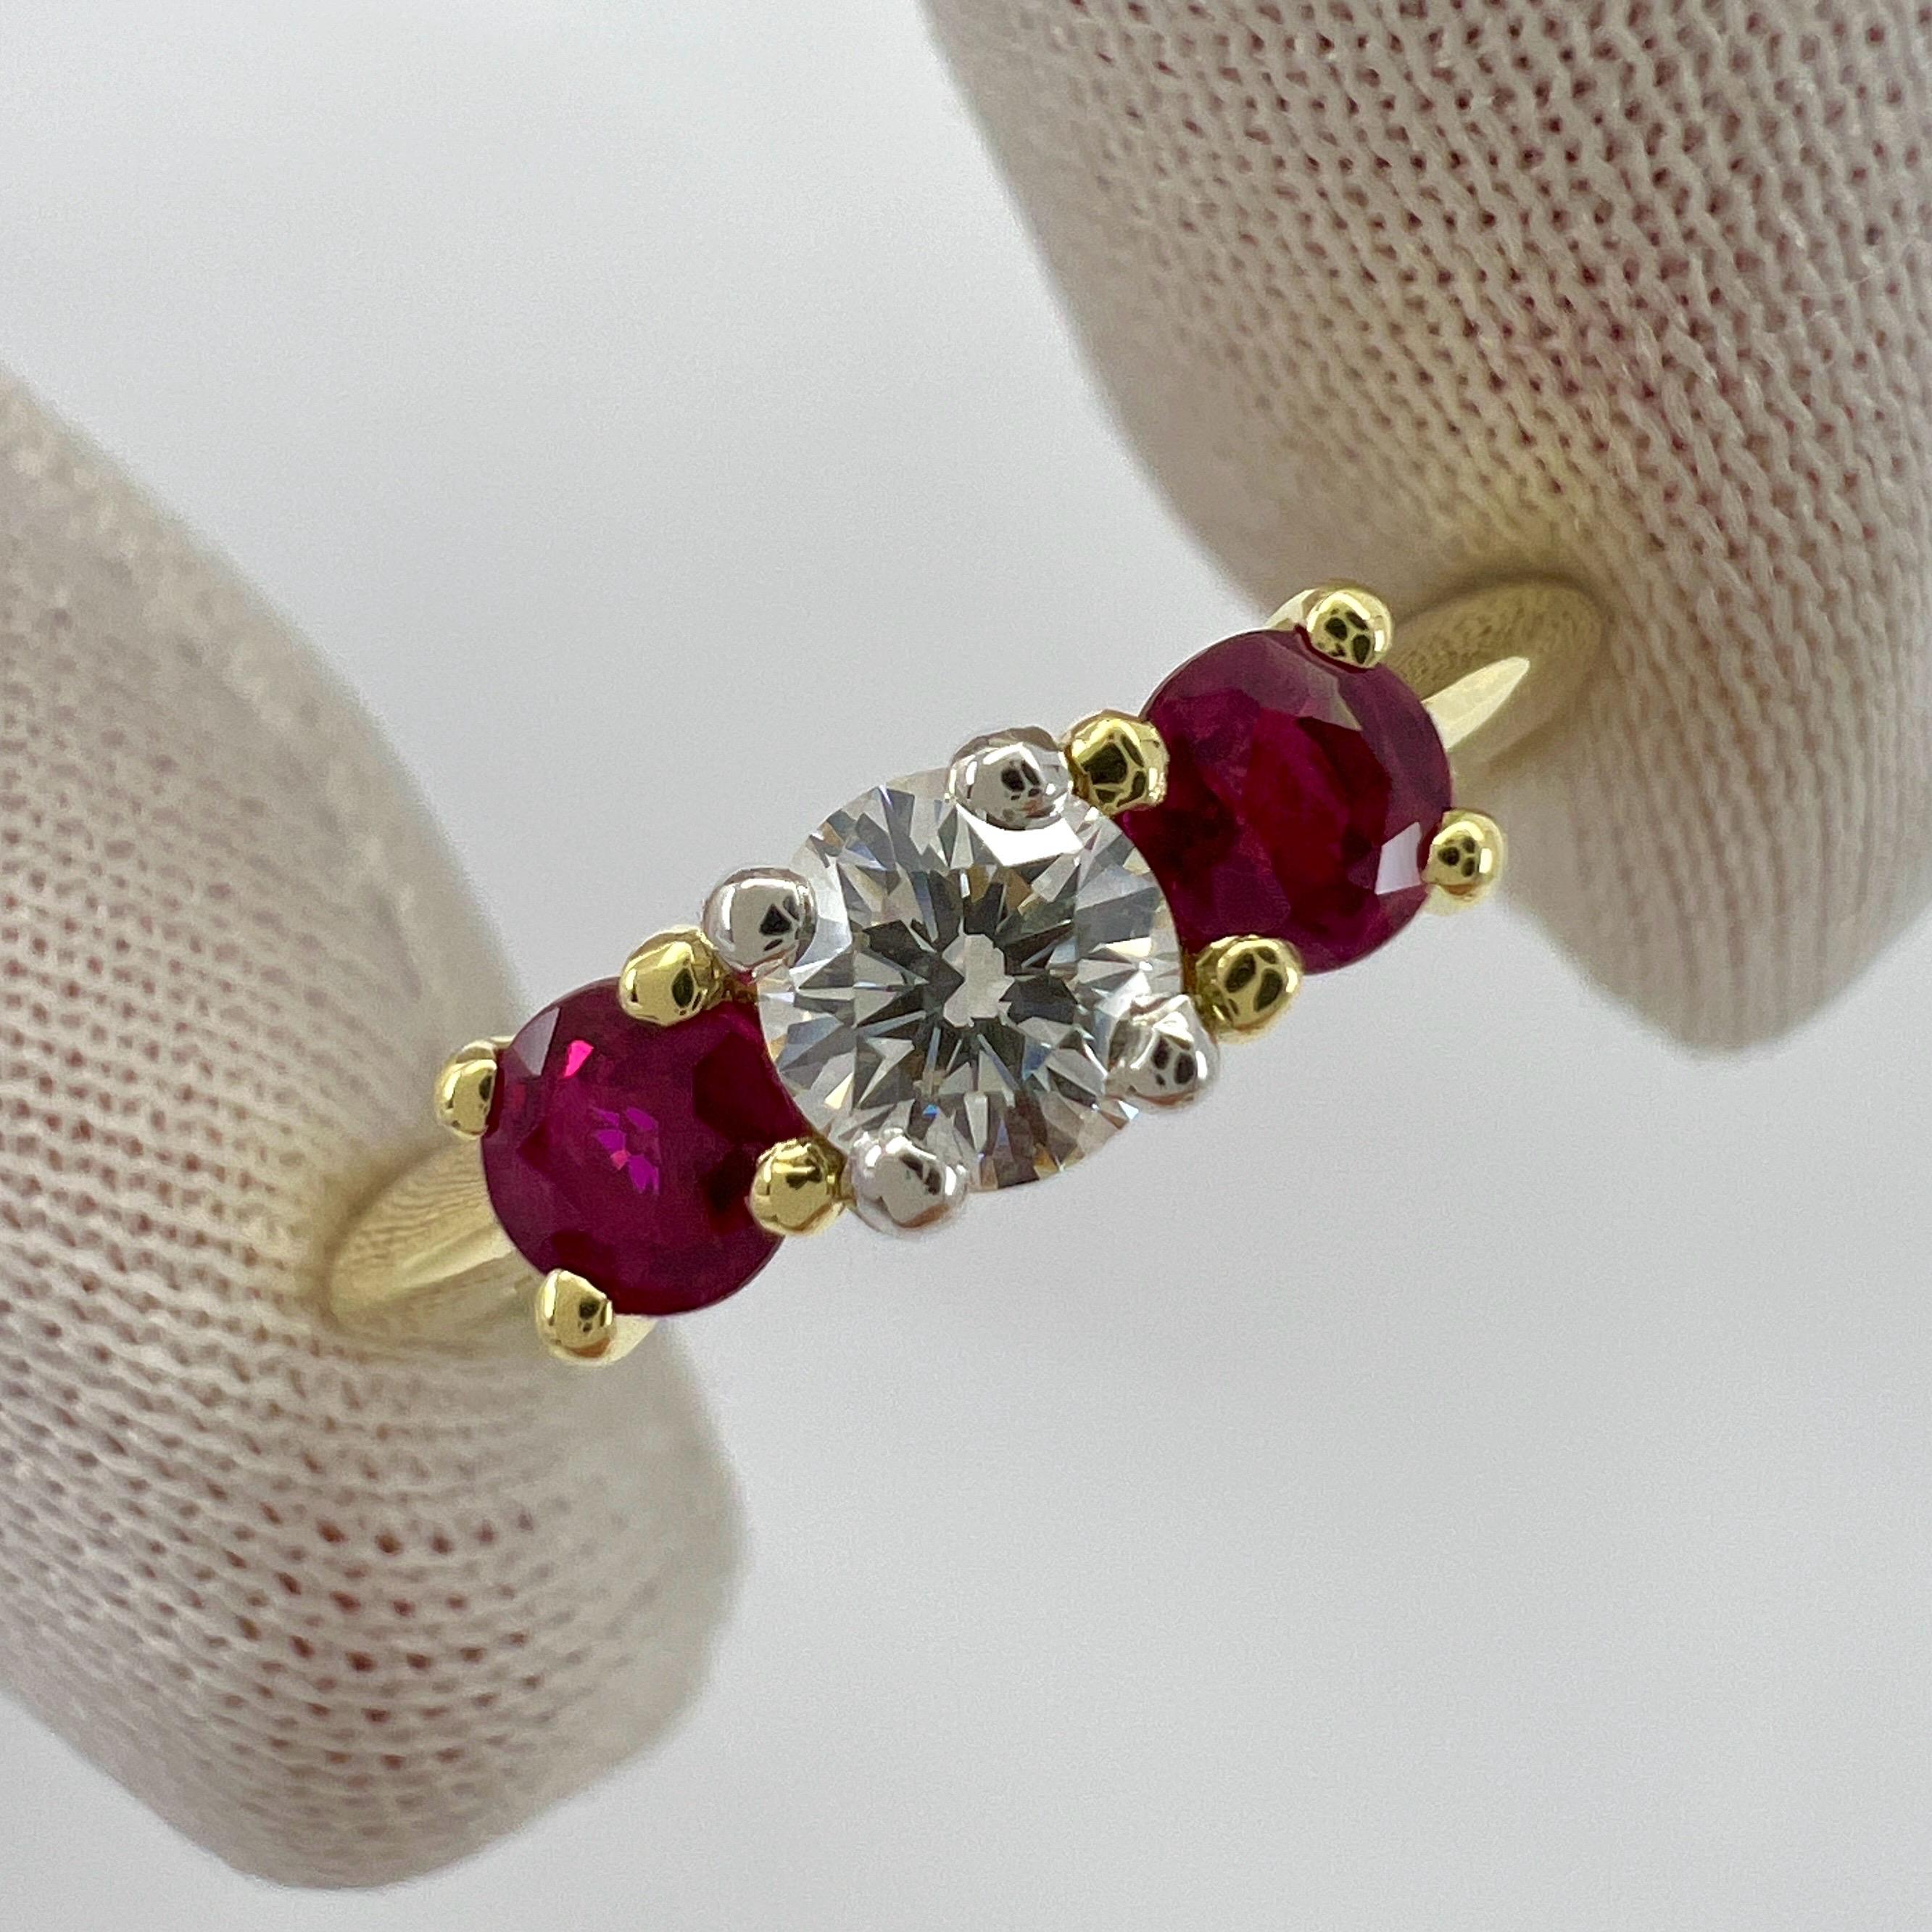 Vintage Tiffany & Co Round Cut Diamond & Ruby 18k Yellow Gold & Platinum Three Stone Ring.

Fine jewellery houses like Tiffany only use the finest diamonds and gemstones in their jewellery and this piece is no exception. A top quality 4mm diamond